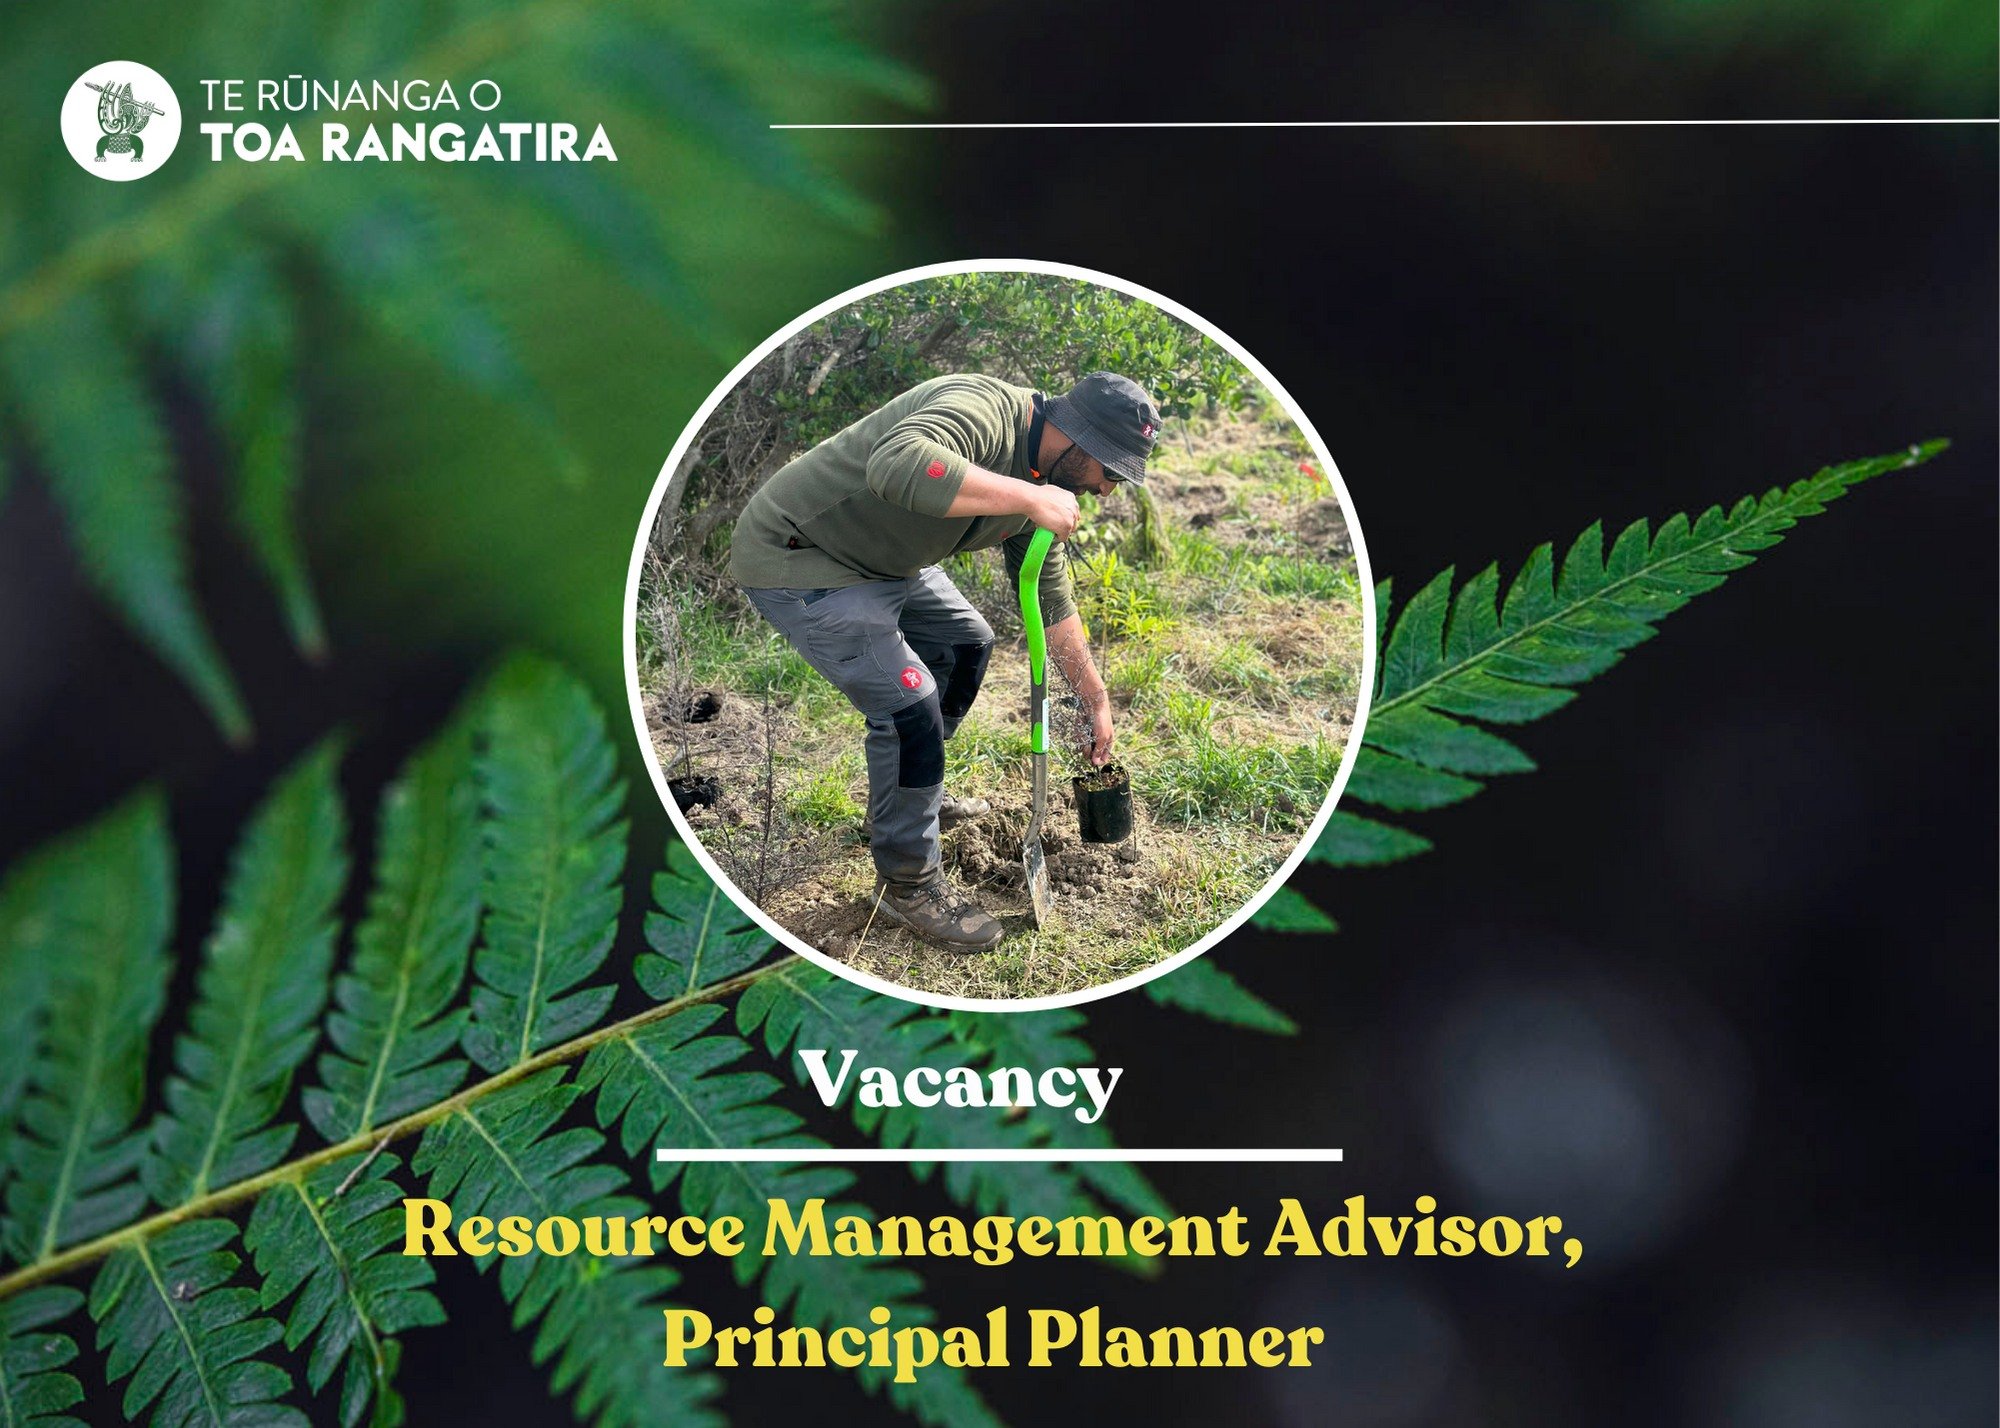 TONO MAI |  RESOURCE MANAGEMENT ADVISOR, PRINCIPAL PLANNER

Protecting our whenua is something we value here at Te Rūnanga o Toa Rangatira. We are looking to hire a Resource Management Advisor who is an expert in planning environmental and land devel